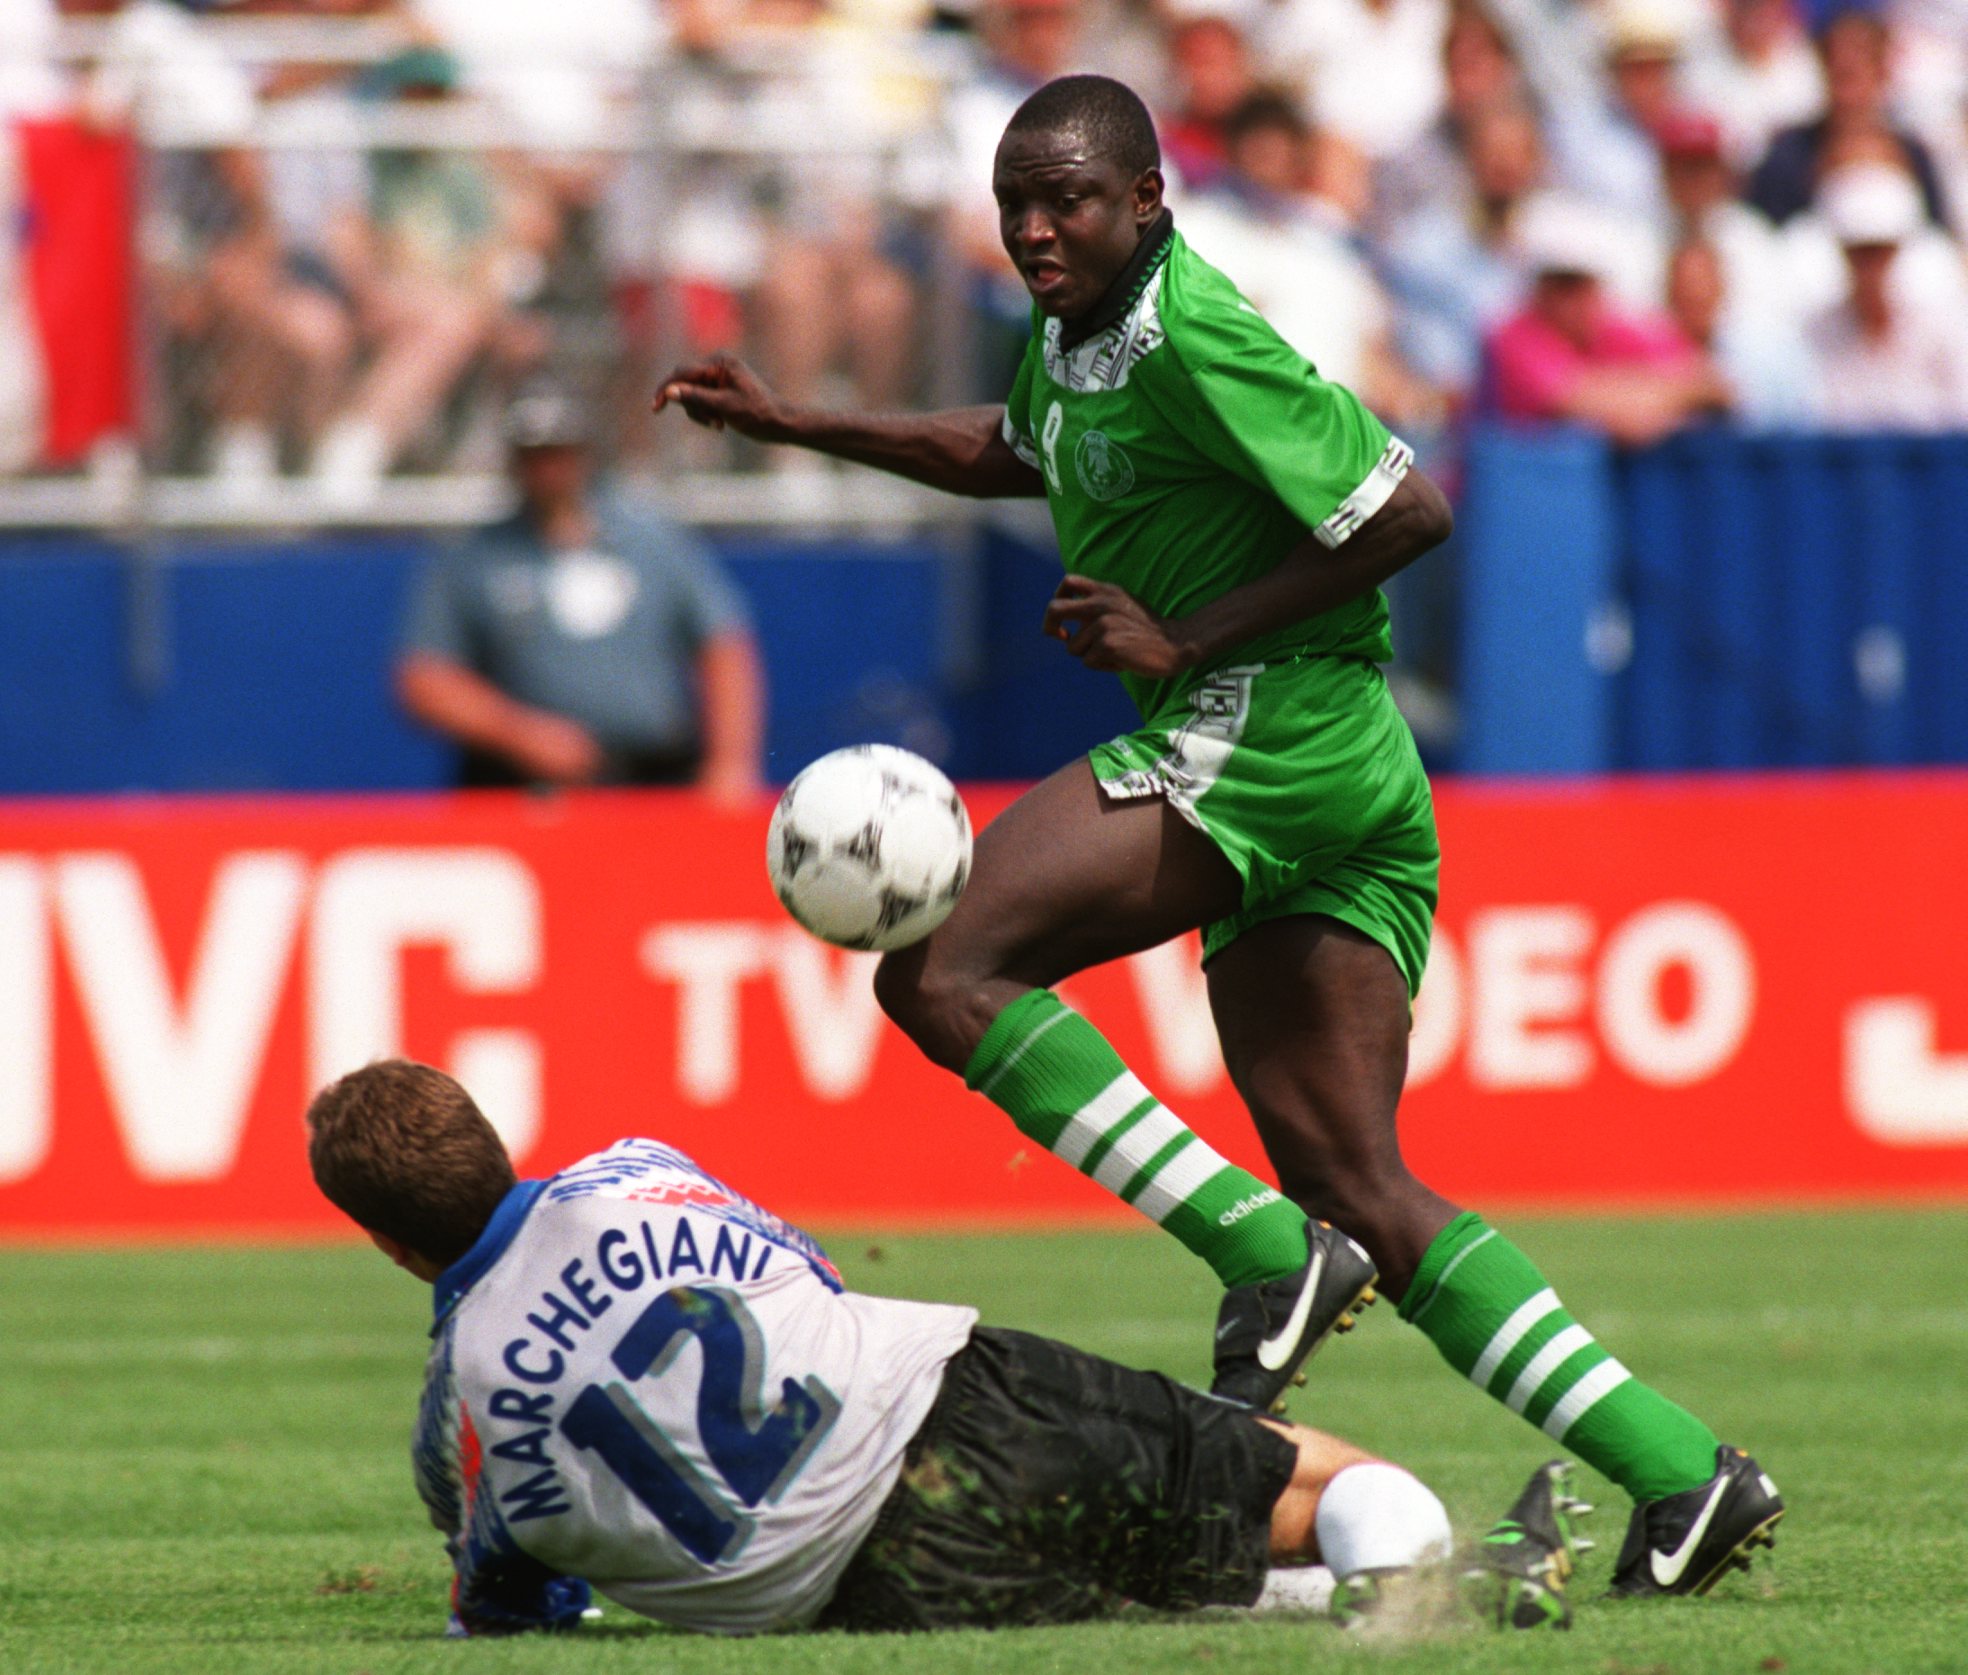 5 JULY 1994:  RASHEED YEKINI OF NIGERIA DRIBBLES AROUND THE FALLEN LUCA MARCHESIANI OF ITALY DURING THEIR SECOND ROUND MATCH IN THE 1994 WORLD CUP AT FOXBORO STADIUM IN MASSACHUSETTS.  ITALY WON THE GAME, 2-1, IN EXTRA TIME. Mandatory Credit: Shaun Botter